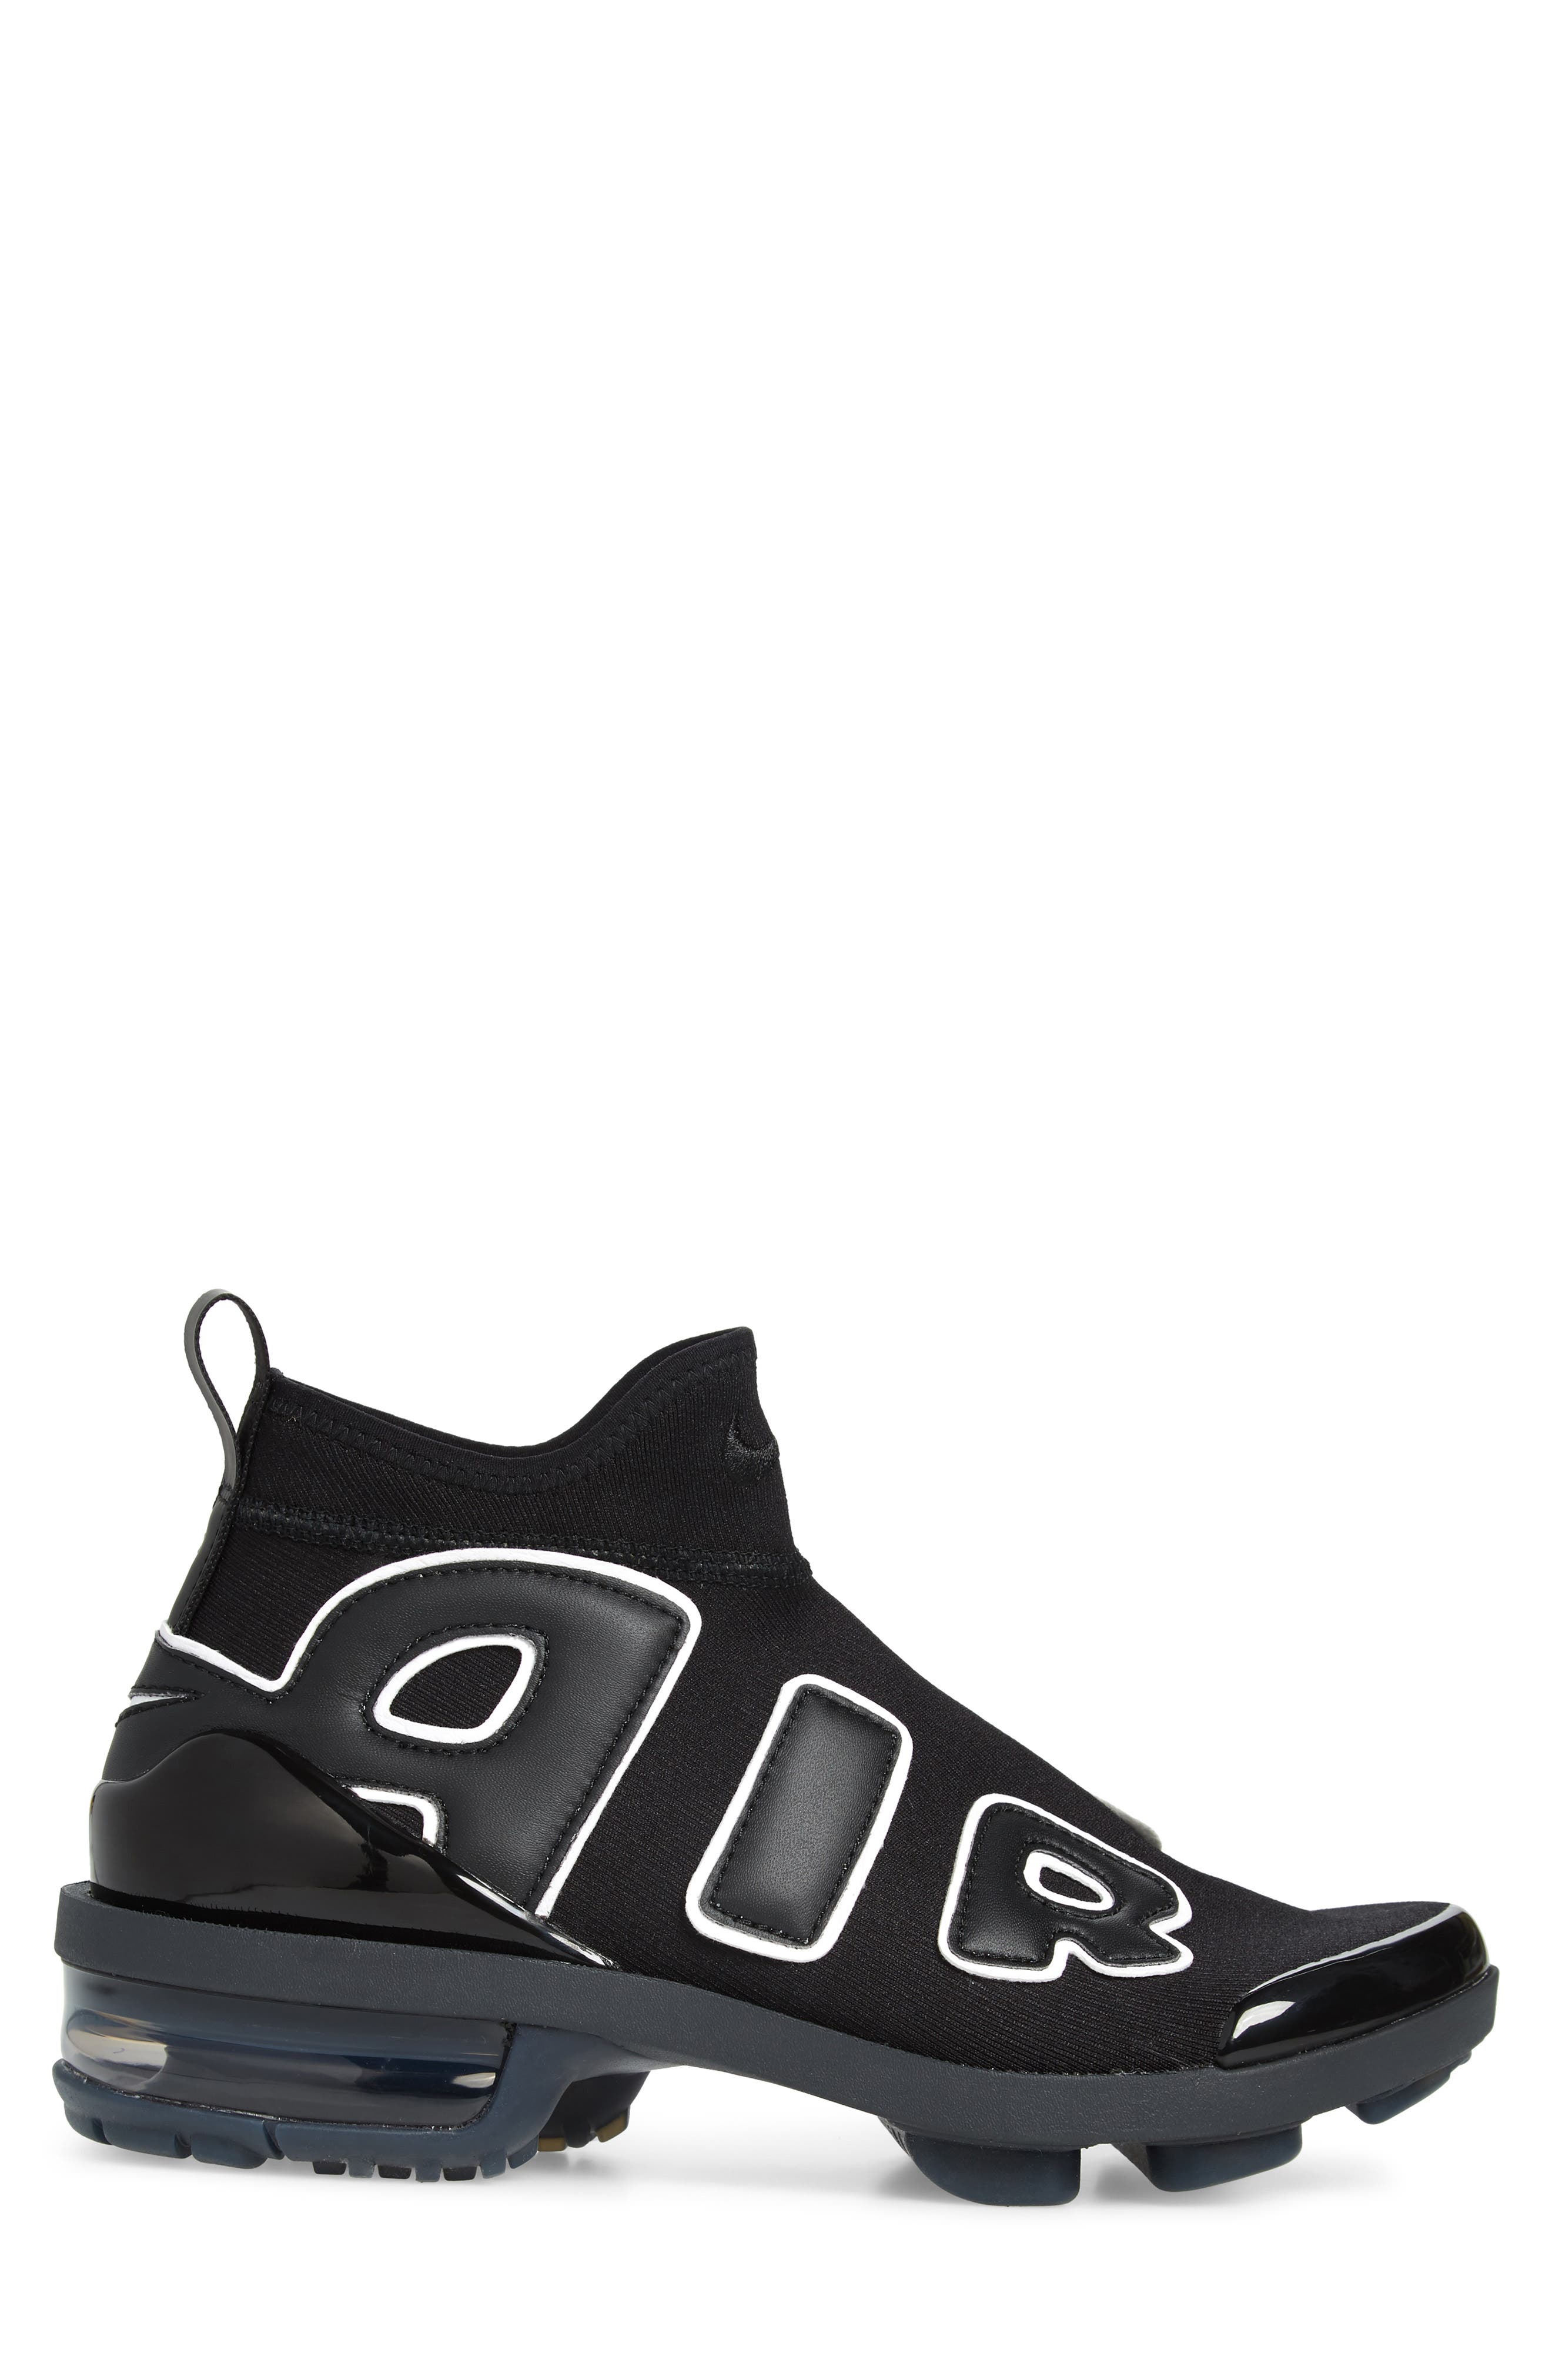 nike airquent pull on high top